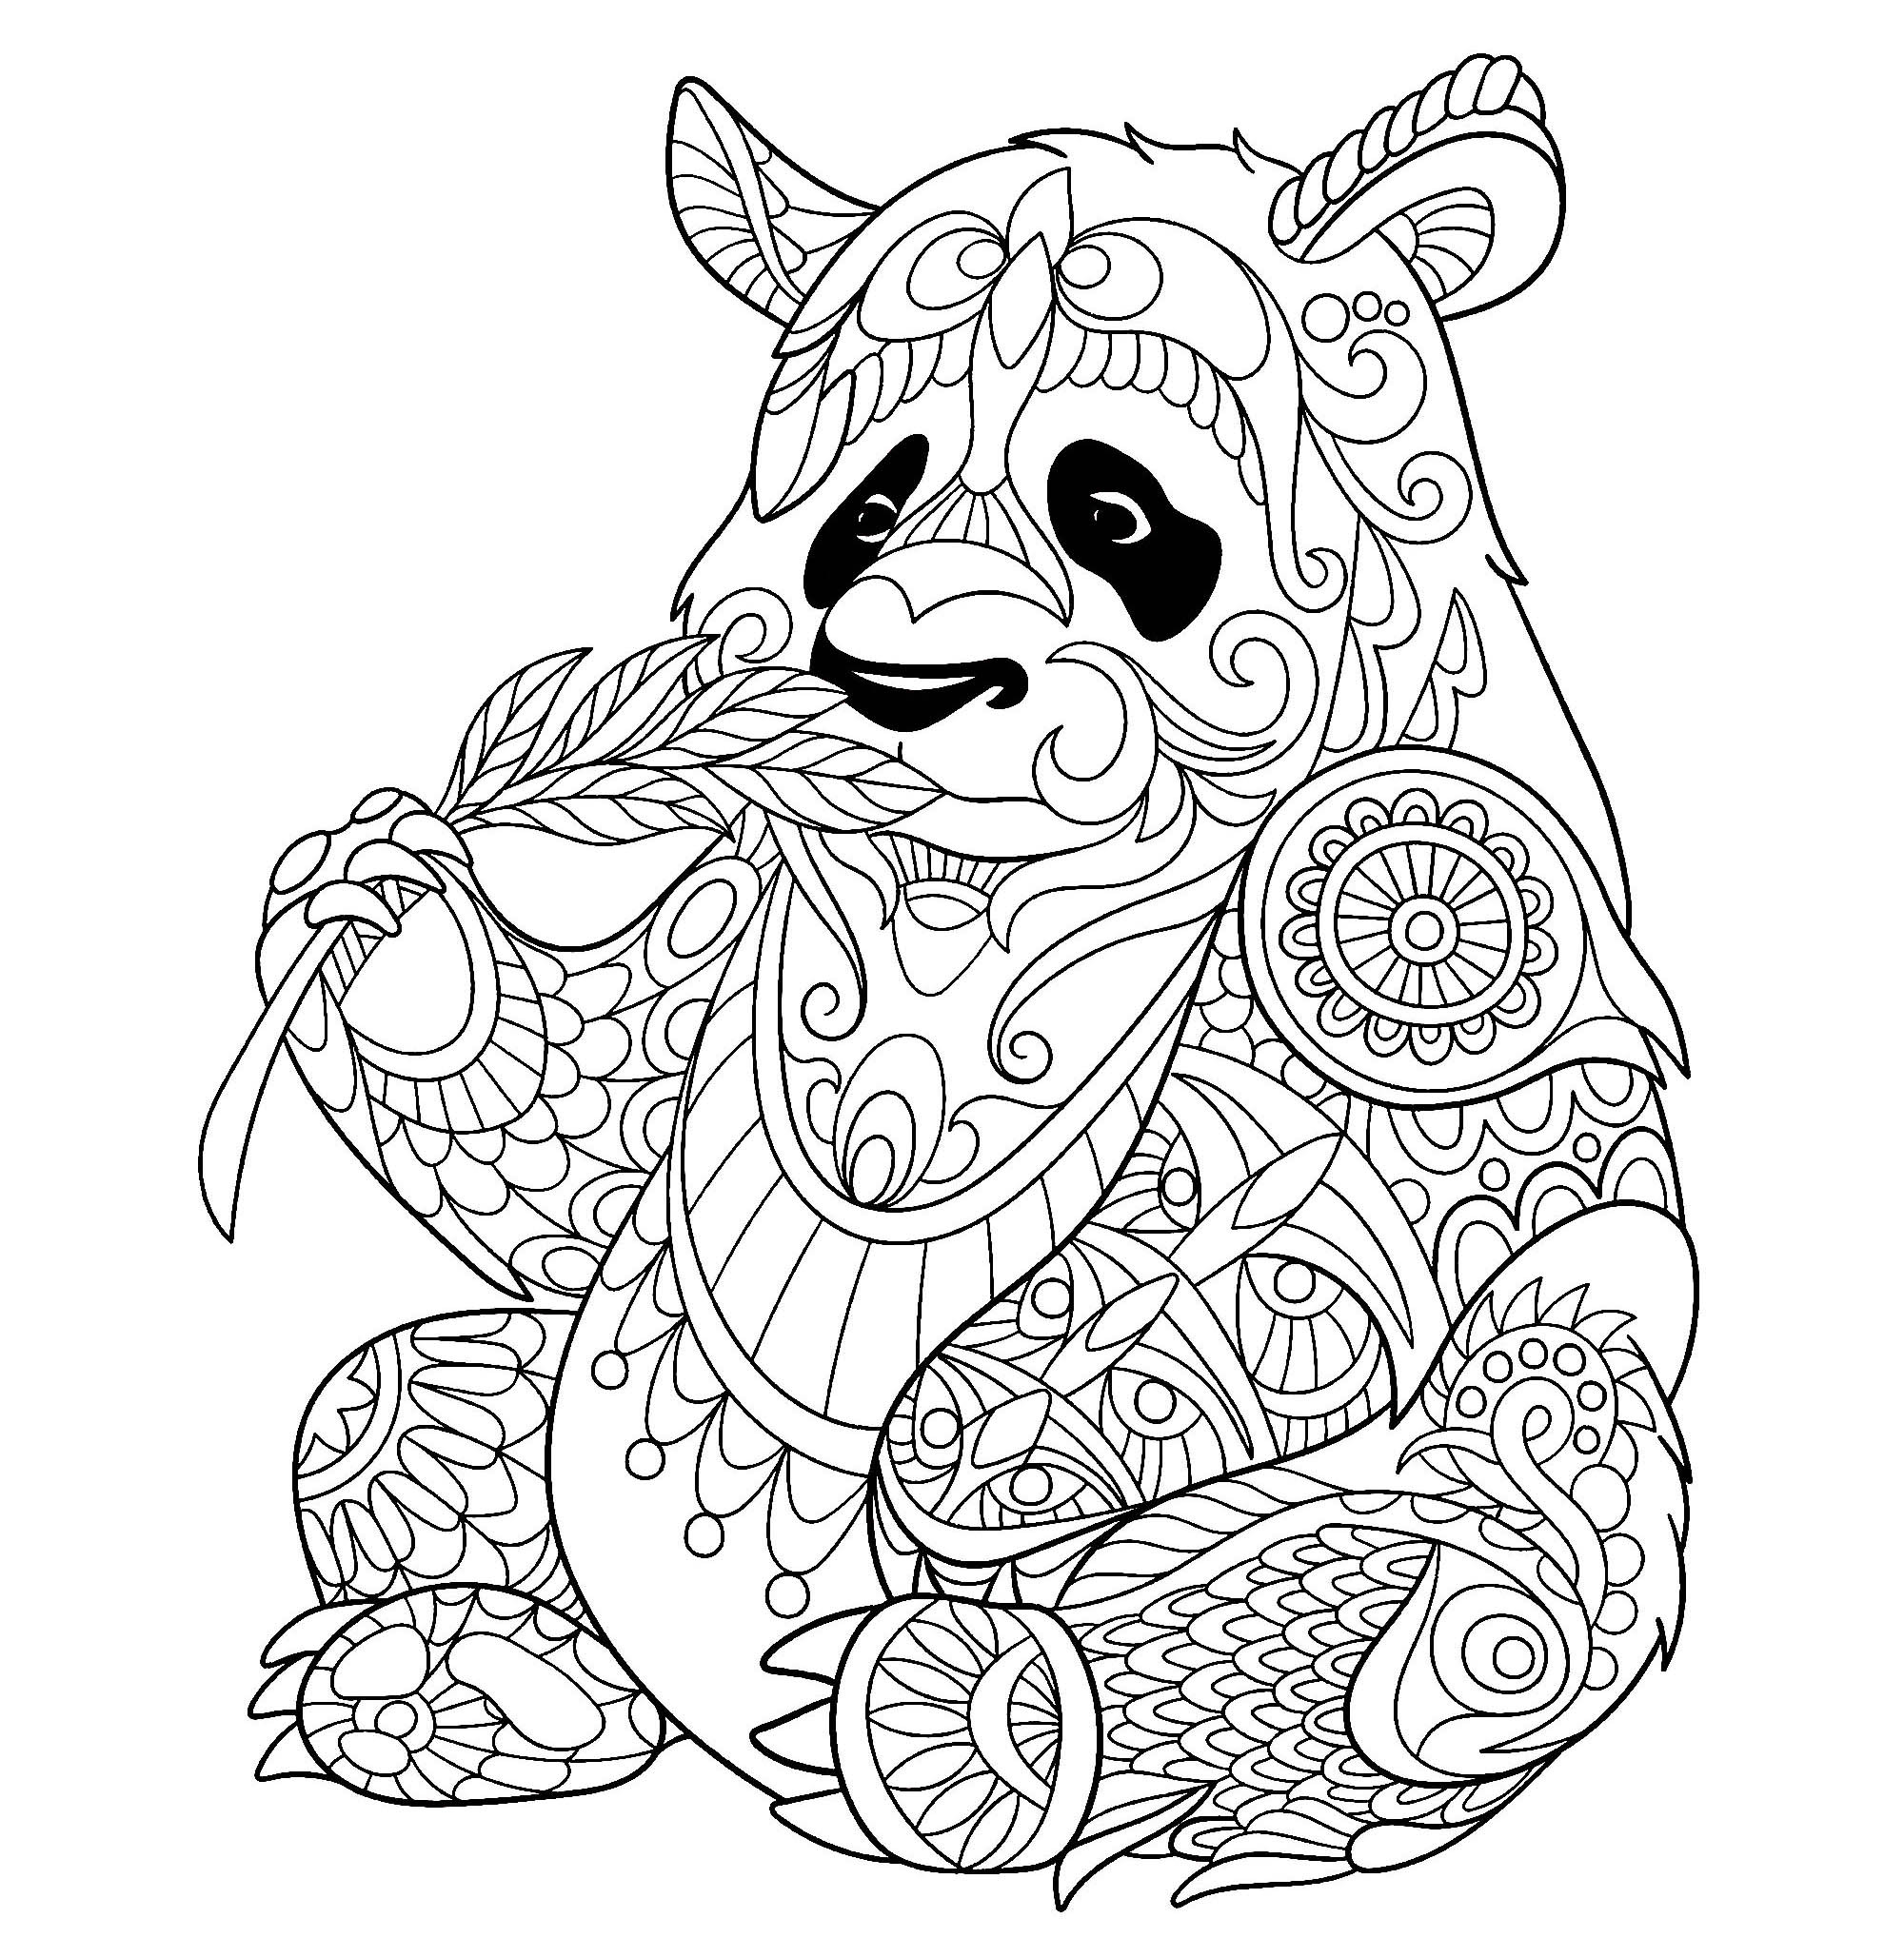 Panda Coloring Pages For Adults
 Panda eating bamboo shoot P&a Adult Coloring Pages